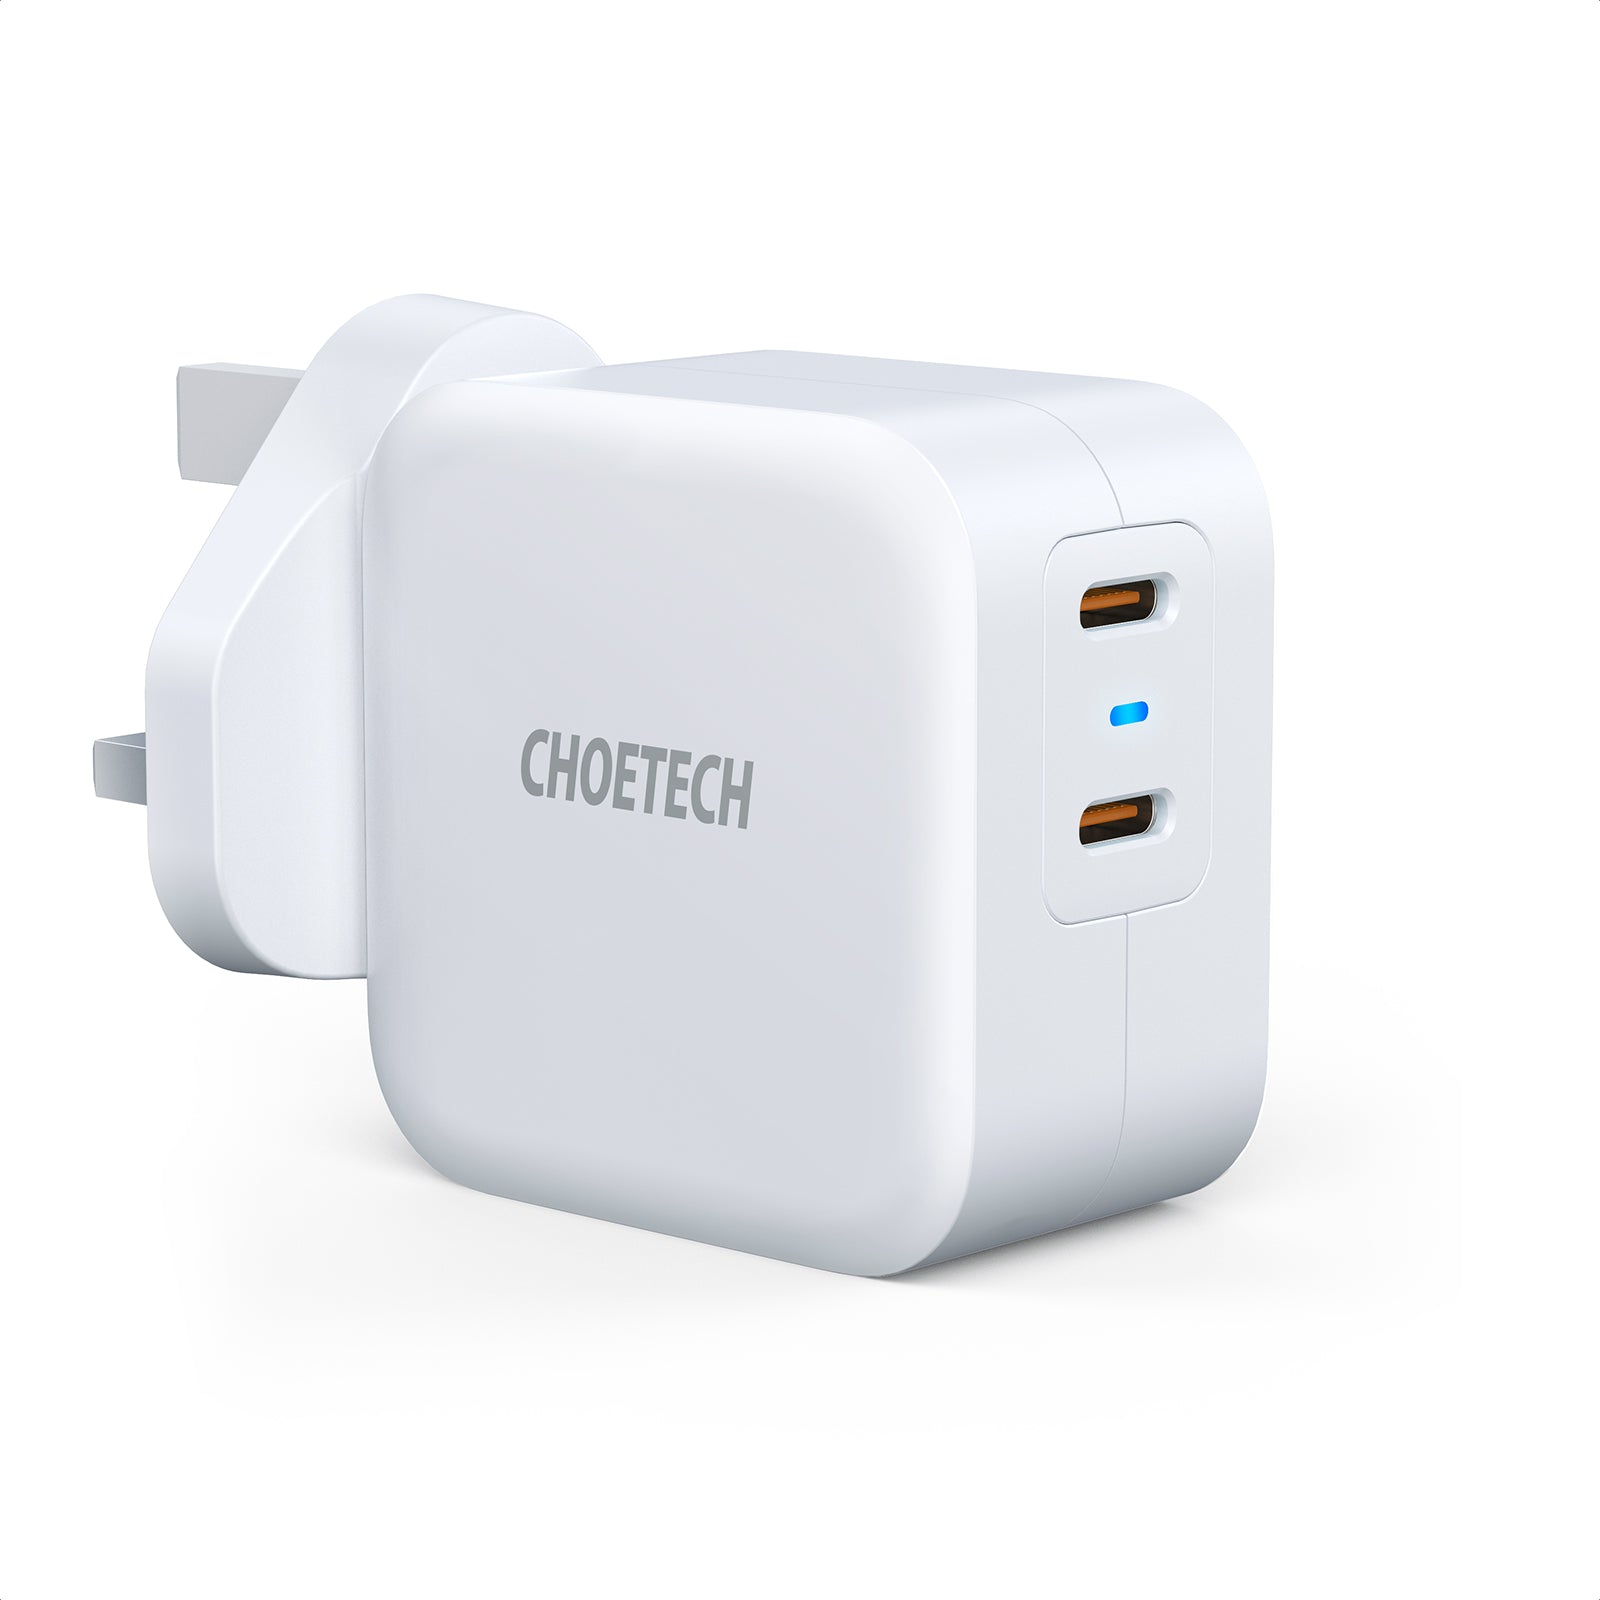 CHOETECH 40W Dual Fast USB C Charger 2-Port 20W PD 3.0 with Foldable Plug for iPhone 12 Pro Max/mini/11/SE,Galaxy, iPad Pro, AirPods, Nintendo Switch CHOETECH